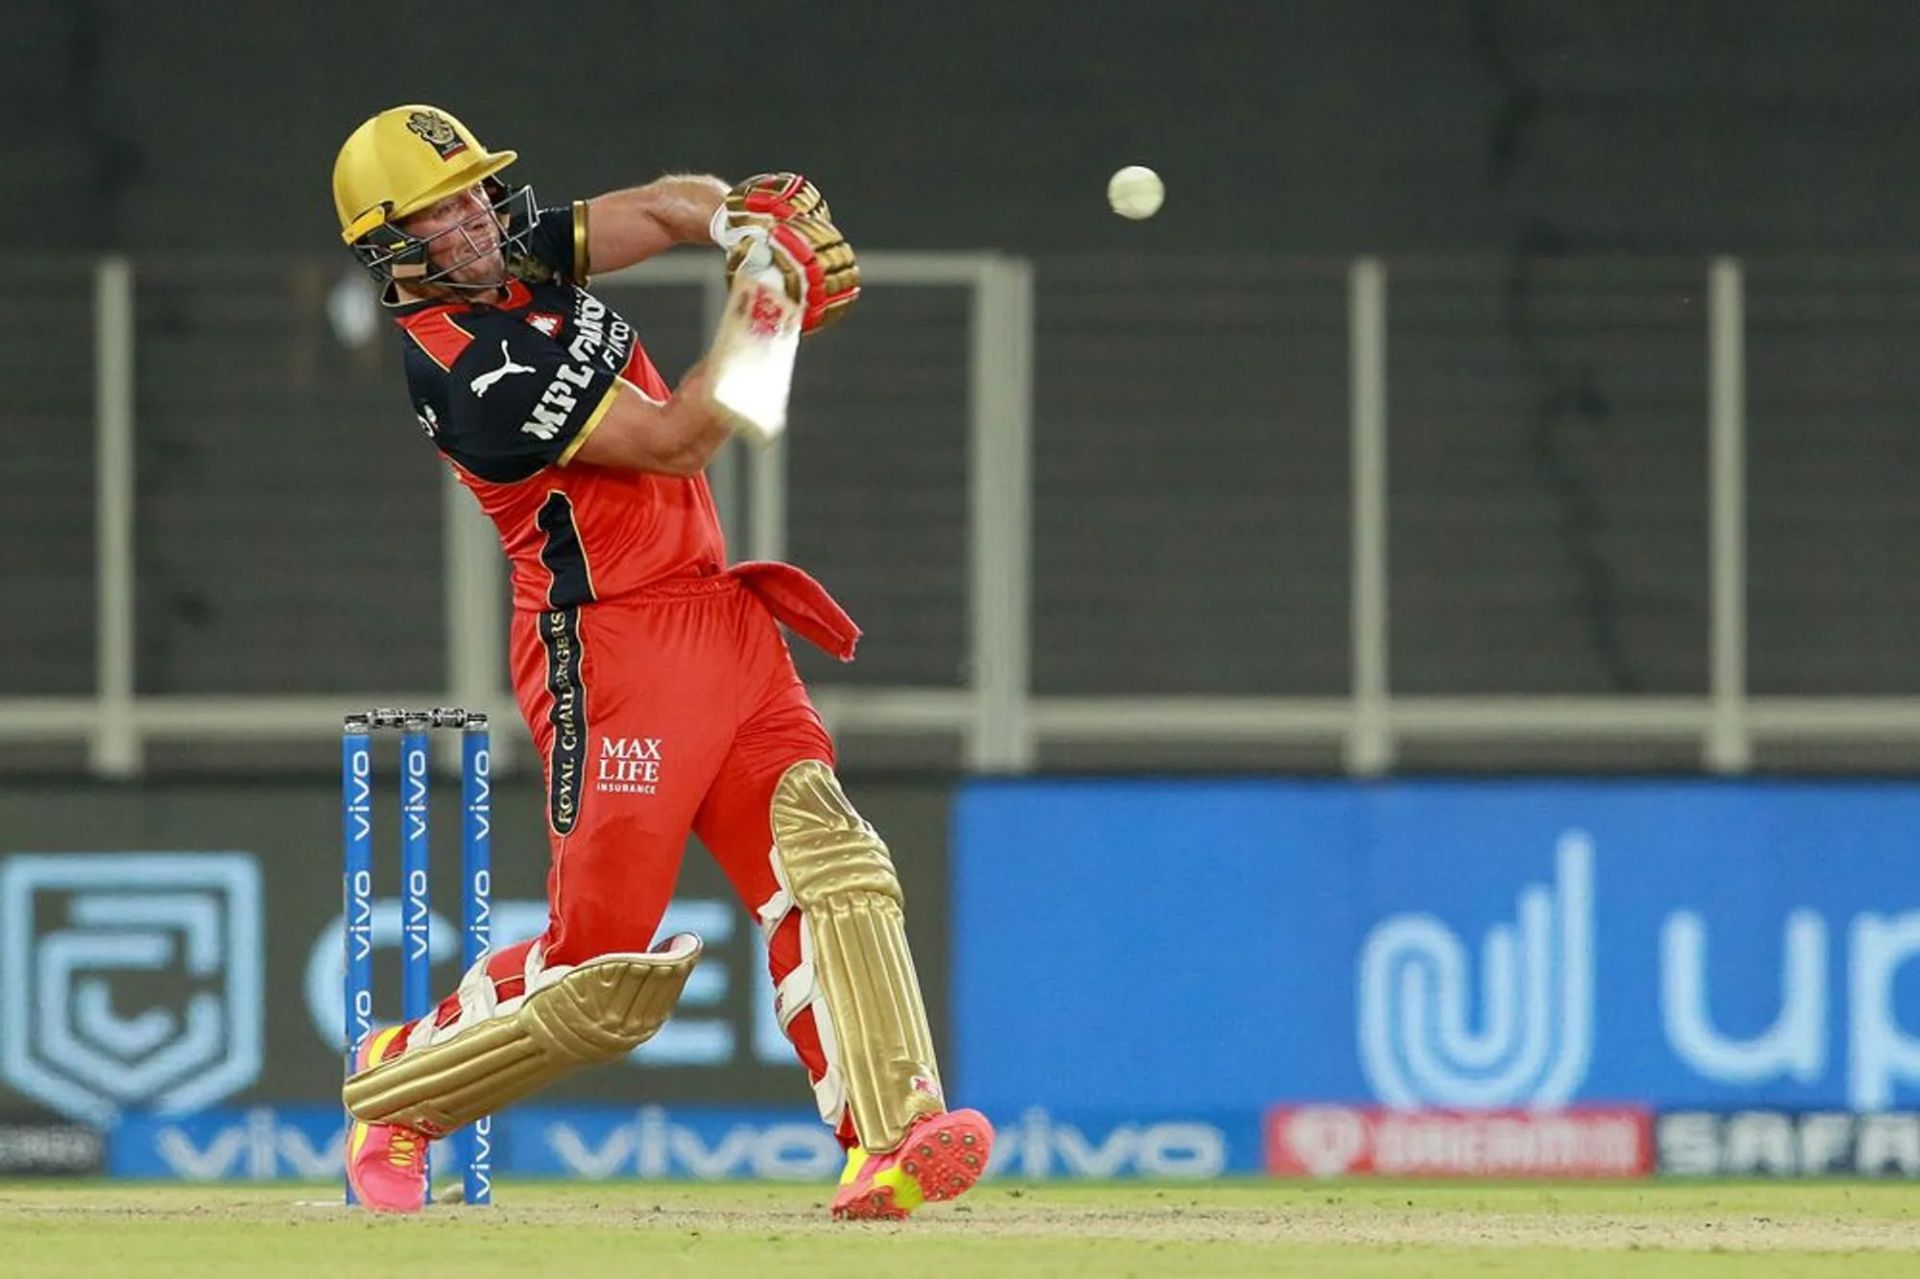 Despite giving his best every season, AB de Villiers could not lead RCB to an IPL title.